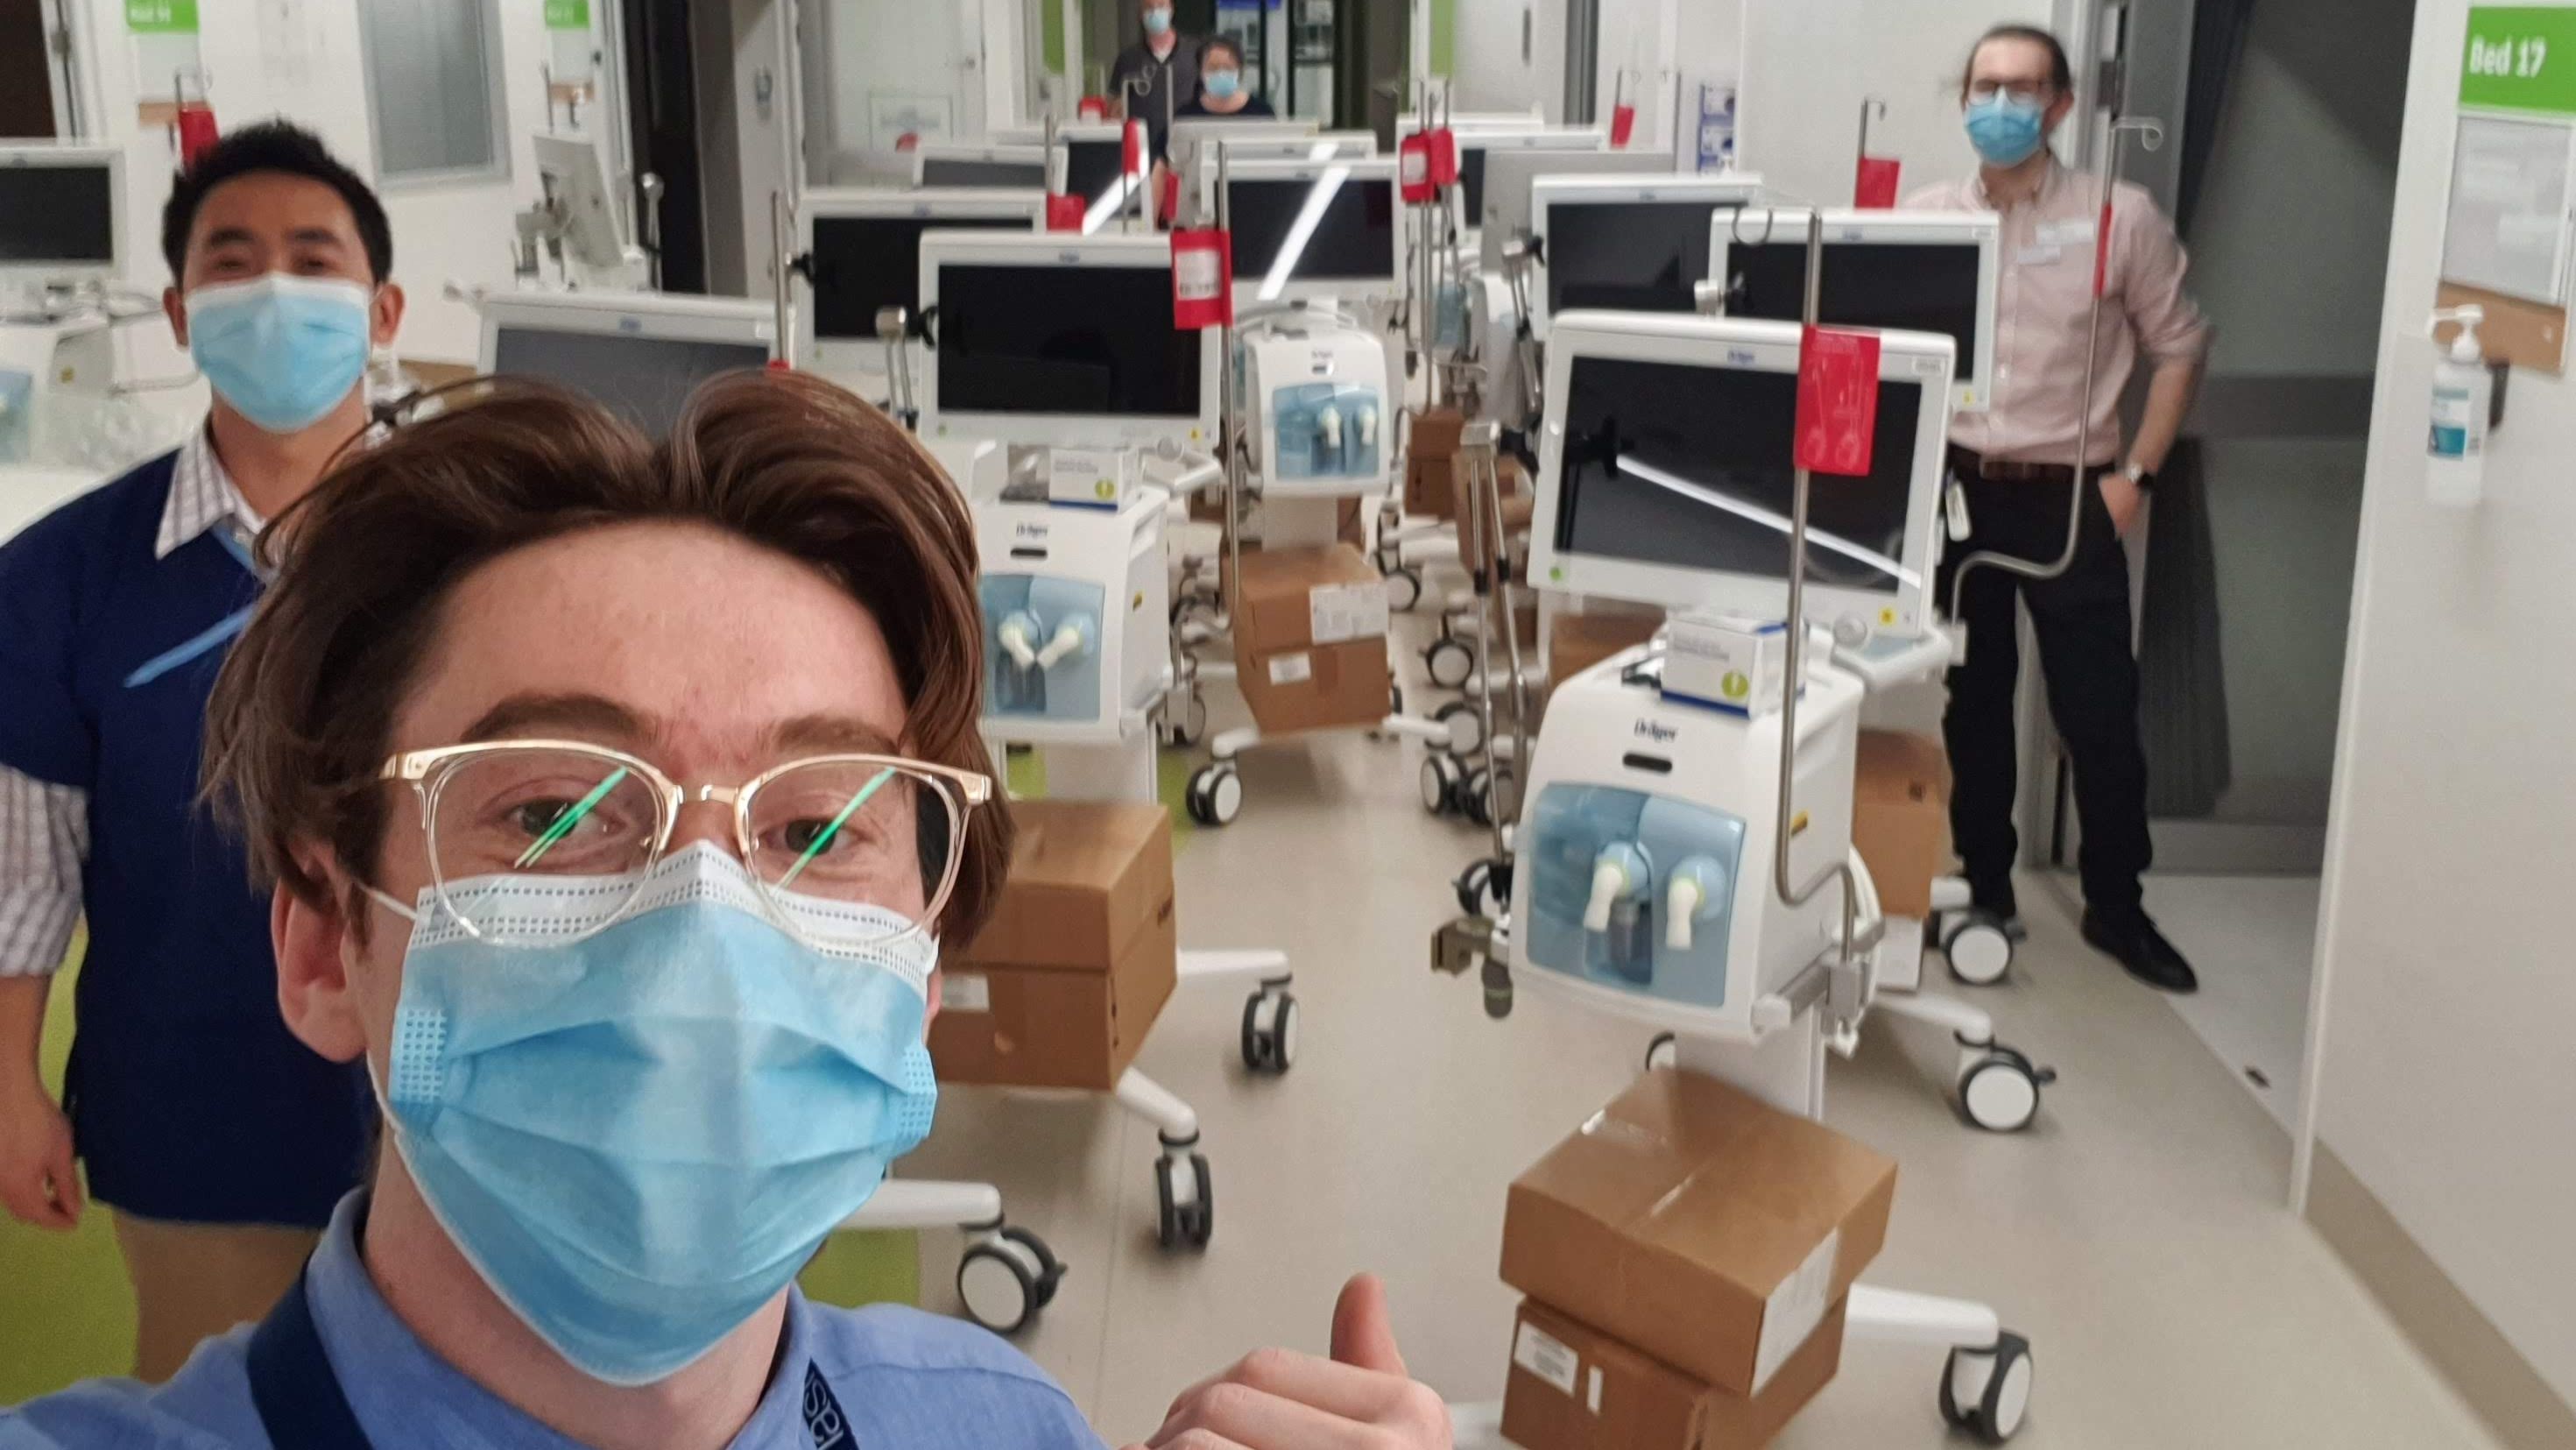 Josh Castle taking a selfie with his thumbs up in a hospital setting. an array of monitors on wheels and two classmates are visible in the background